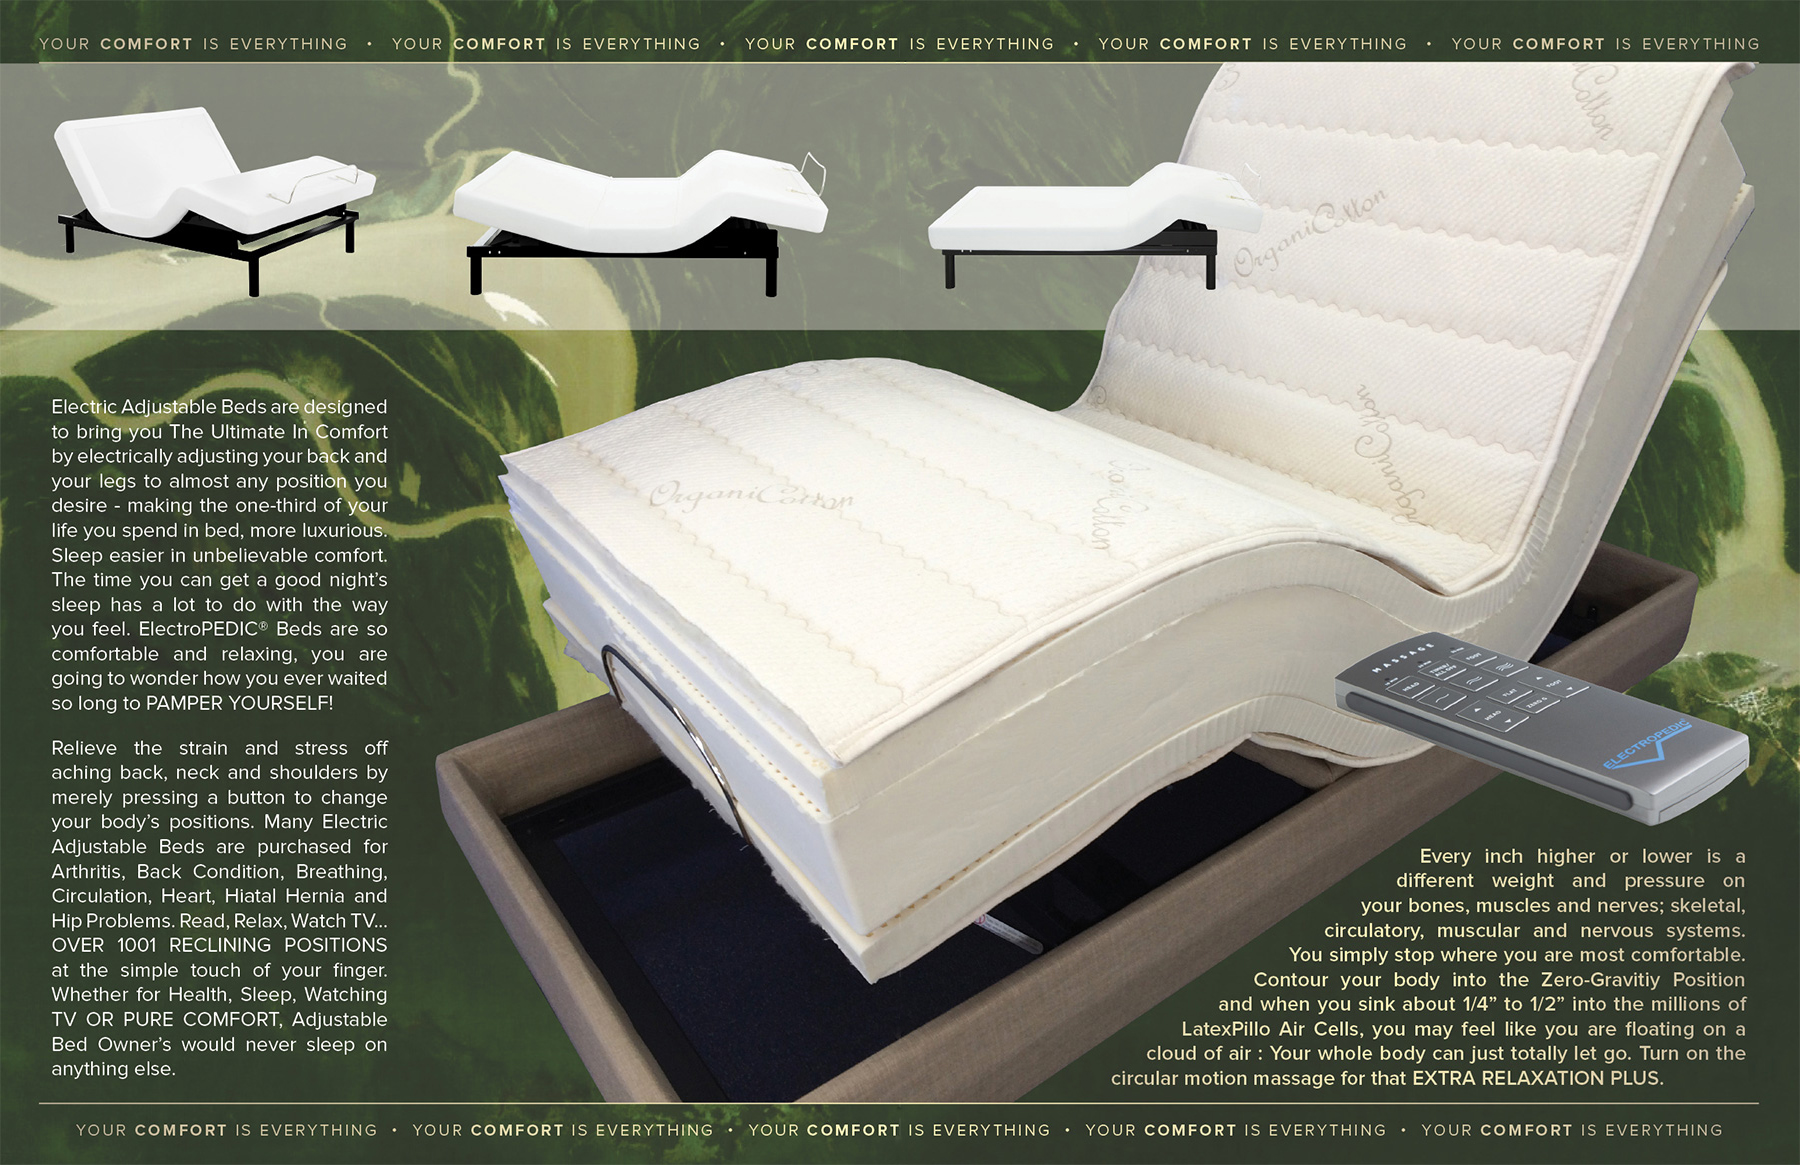 THE ULTIMATE in LA El Monte latex-pedic natural organic pure certified cotton and wool mattresses